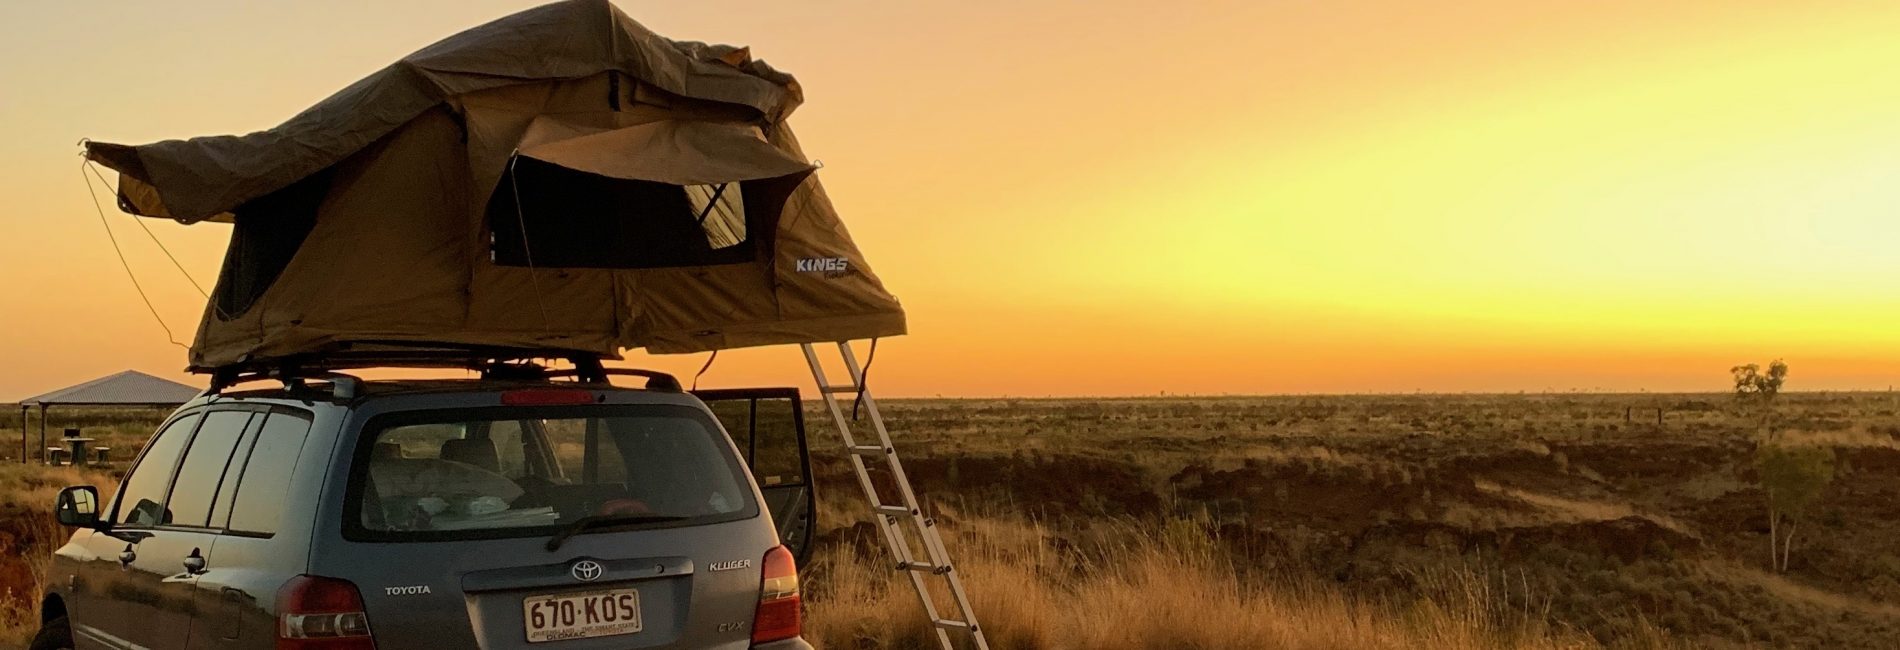 The Ultimate Guide For A Road Trip In Australia – Getting Ready